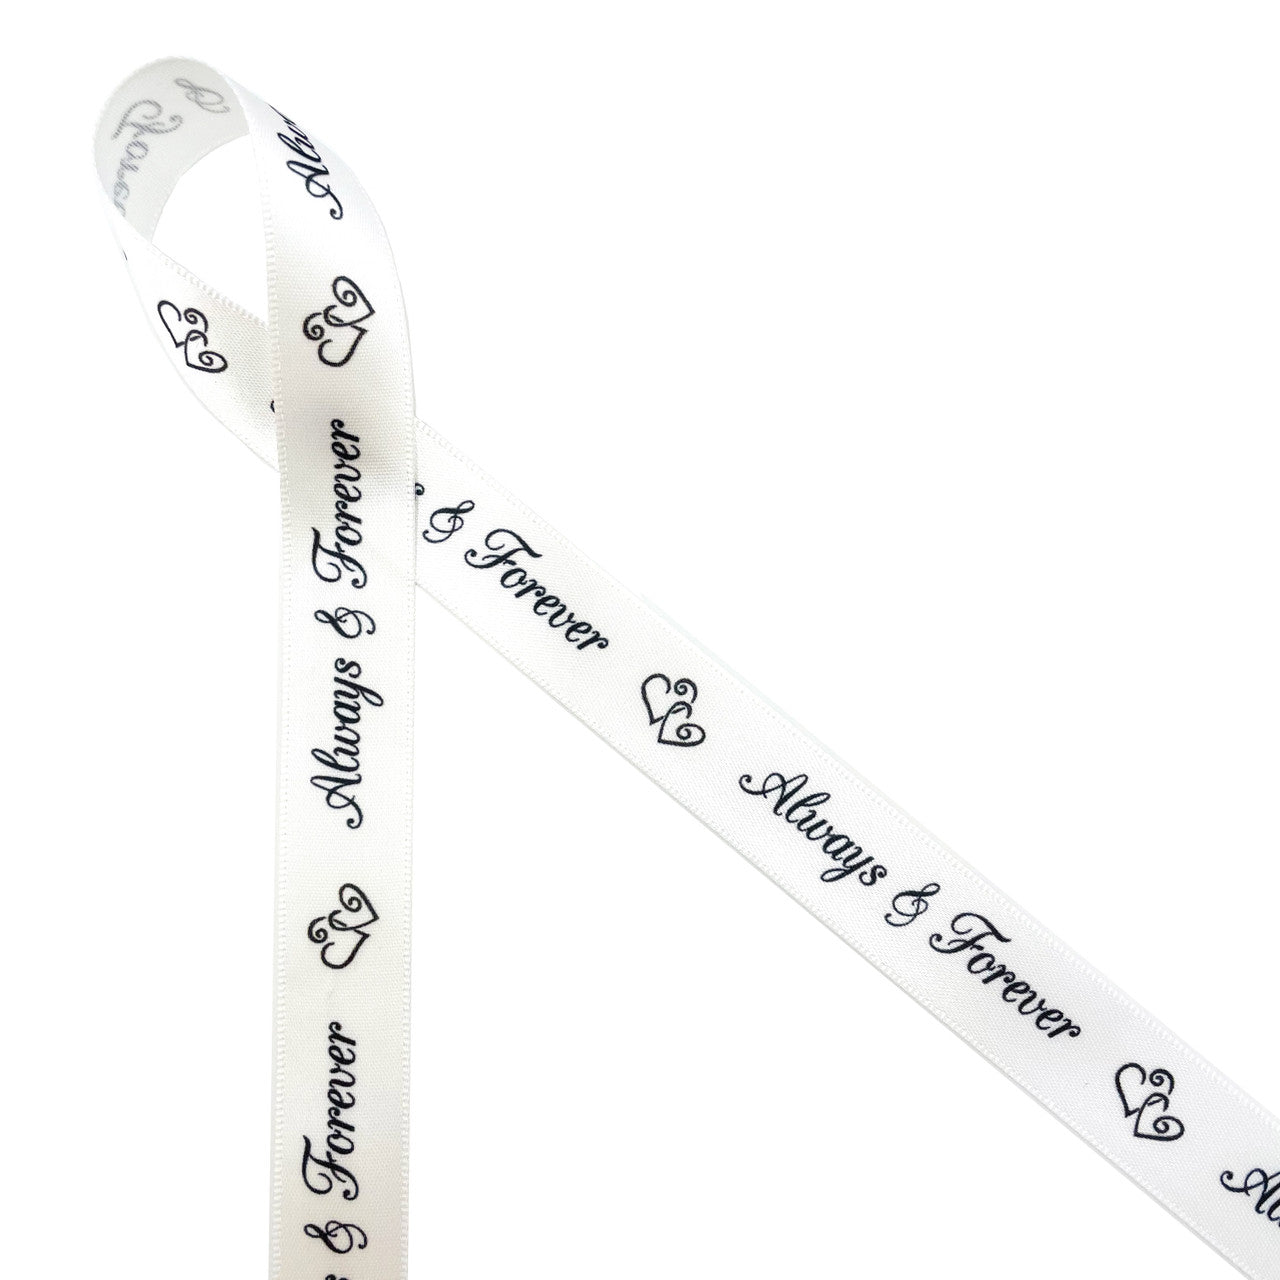 Always & Forever in a pretty script on 5/8" white single face satin ribbon is an expression of love and commitment. Make this sentiment part of your wedding by adding it to your favors!